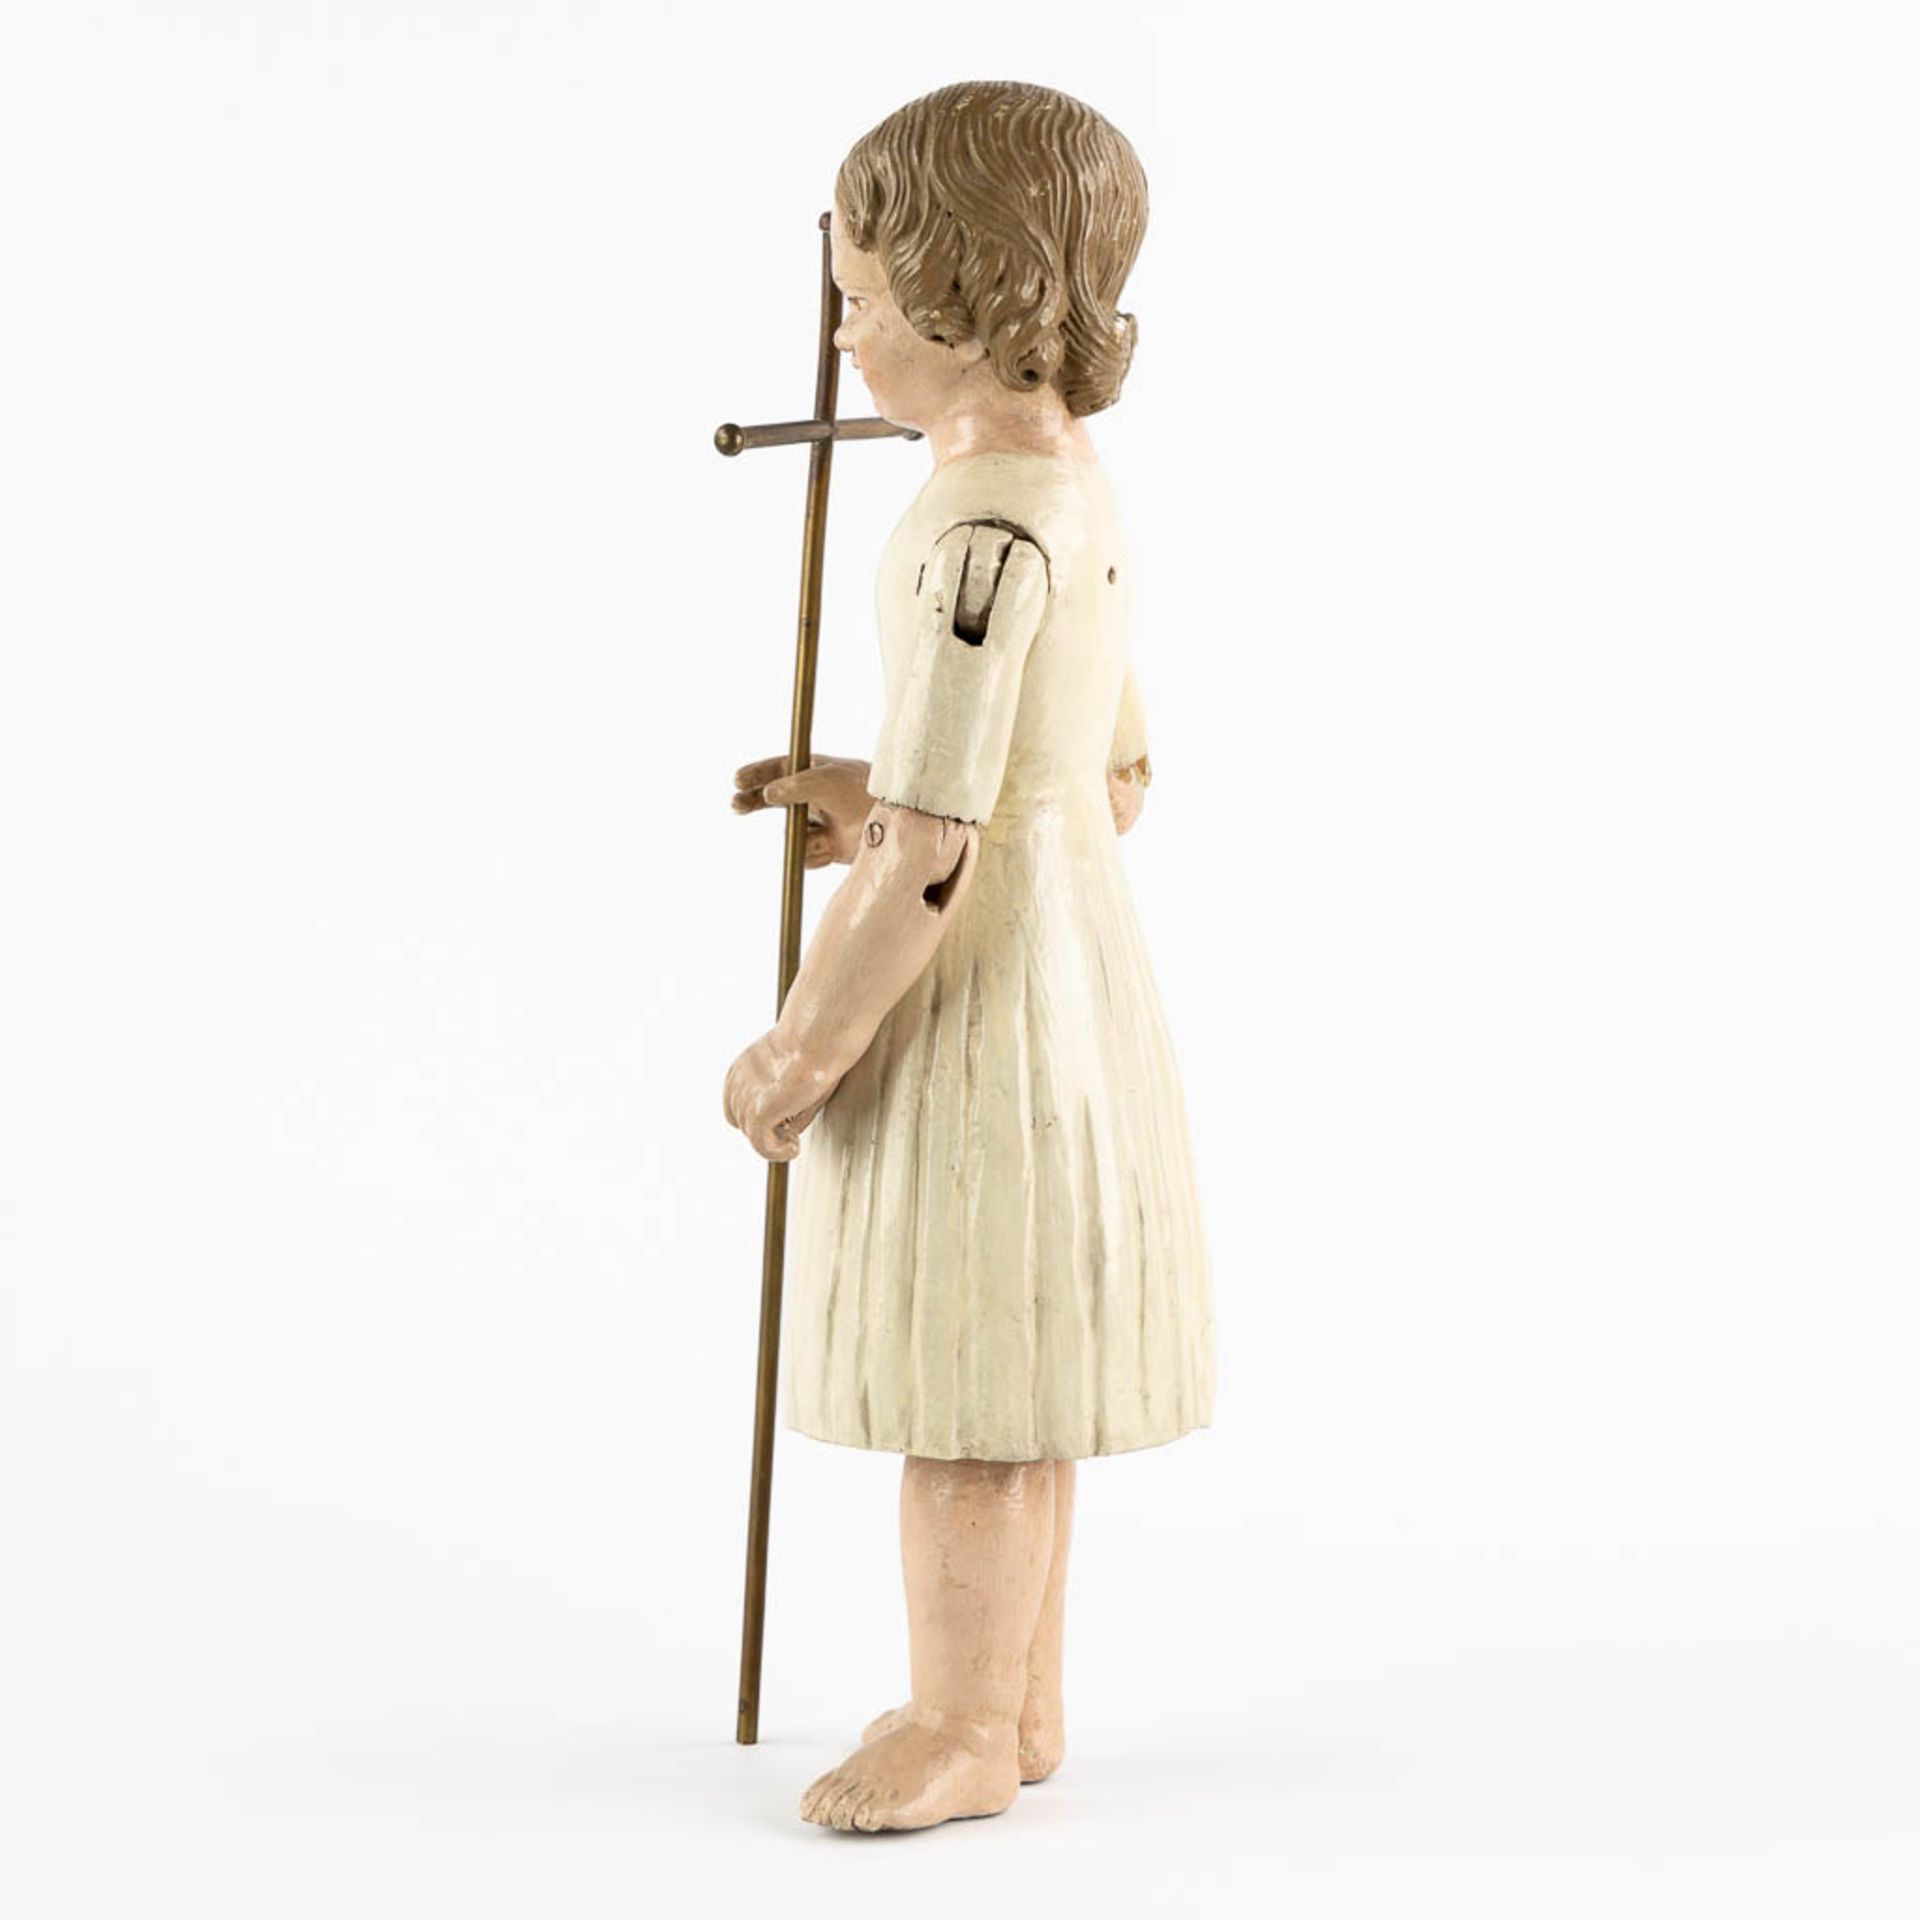 An antique patinated and wood-sculptured doll. 19th C. (L:11,5 x W:17 x H:45 cm) - Image 5 of 12